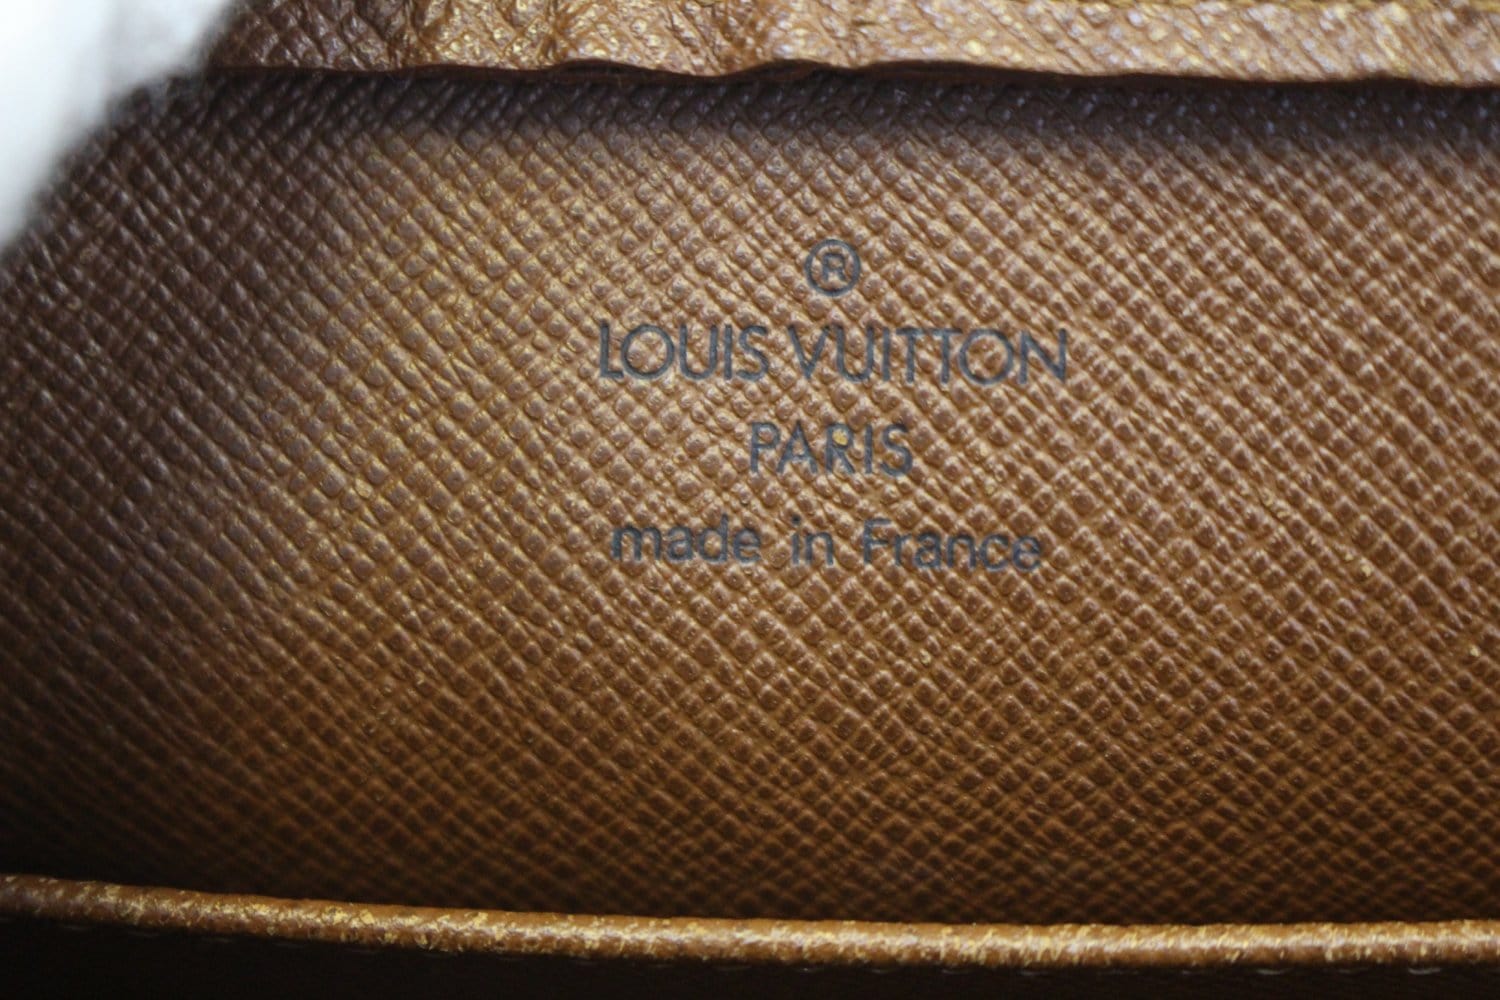 Louis Vuitton Orsay mm Red Calf